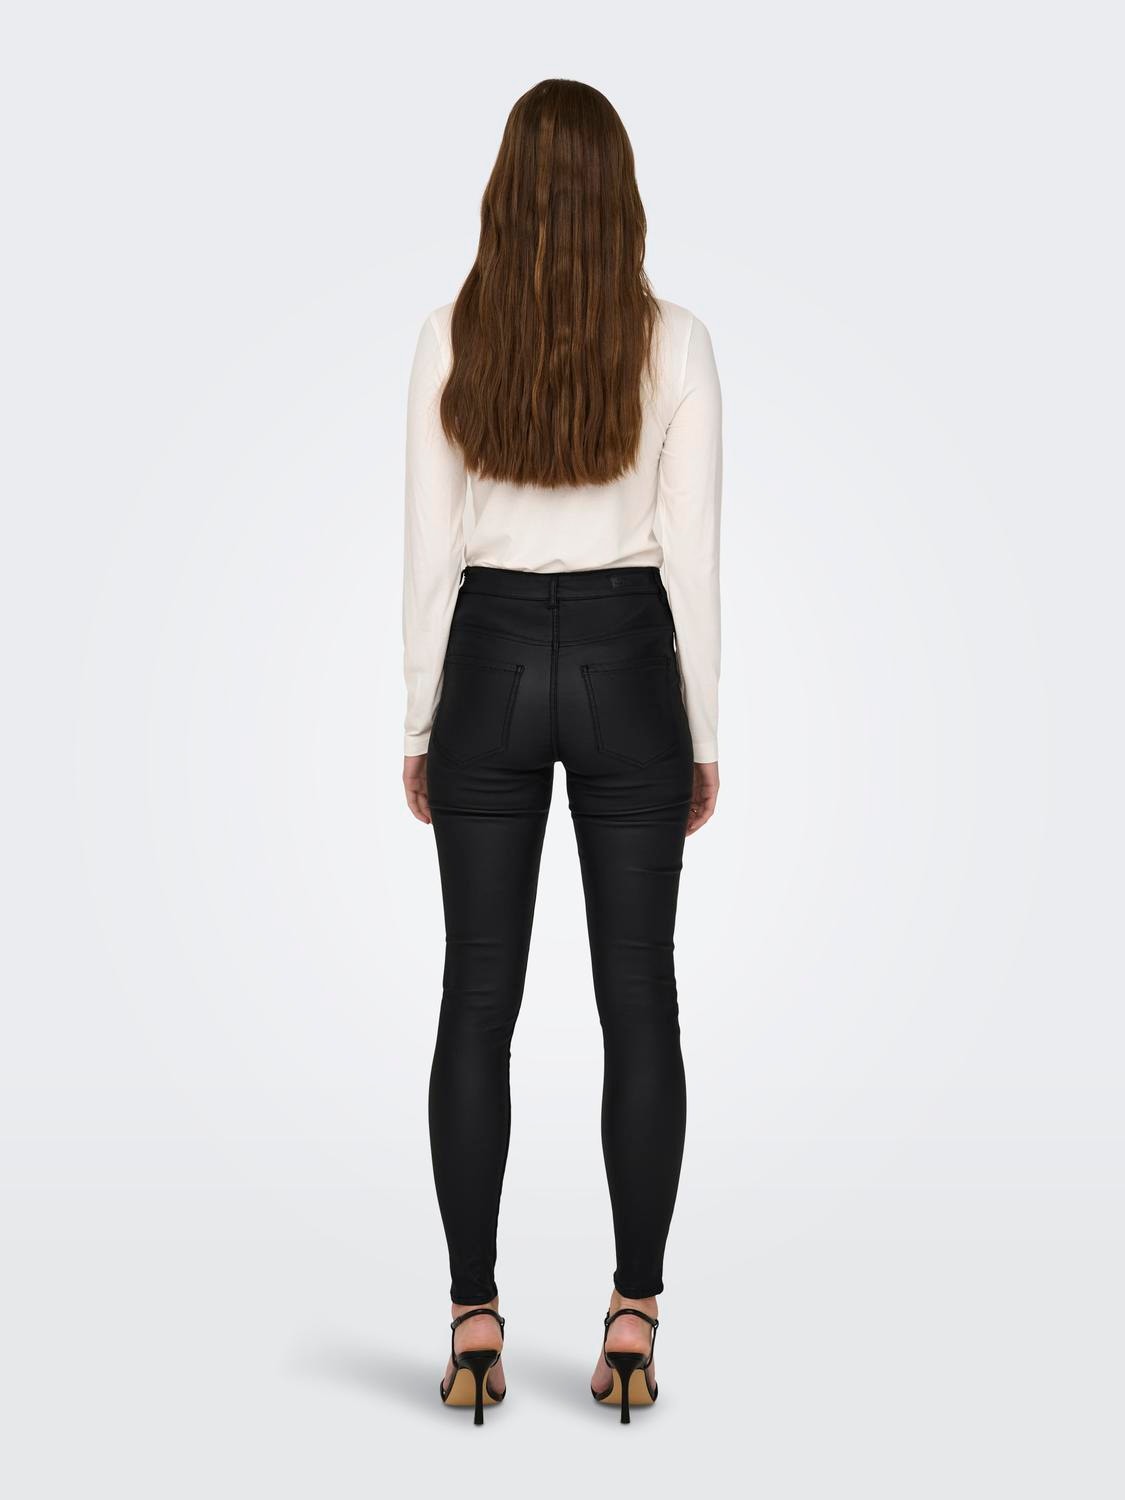 ONLY Skinny coated trousers -Black - 15211786